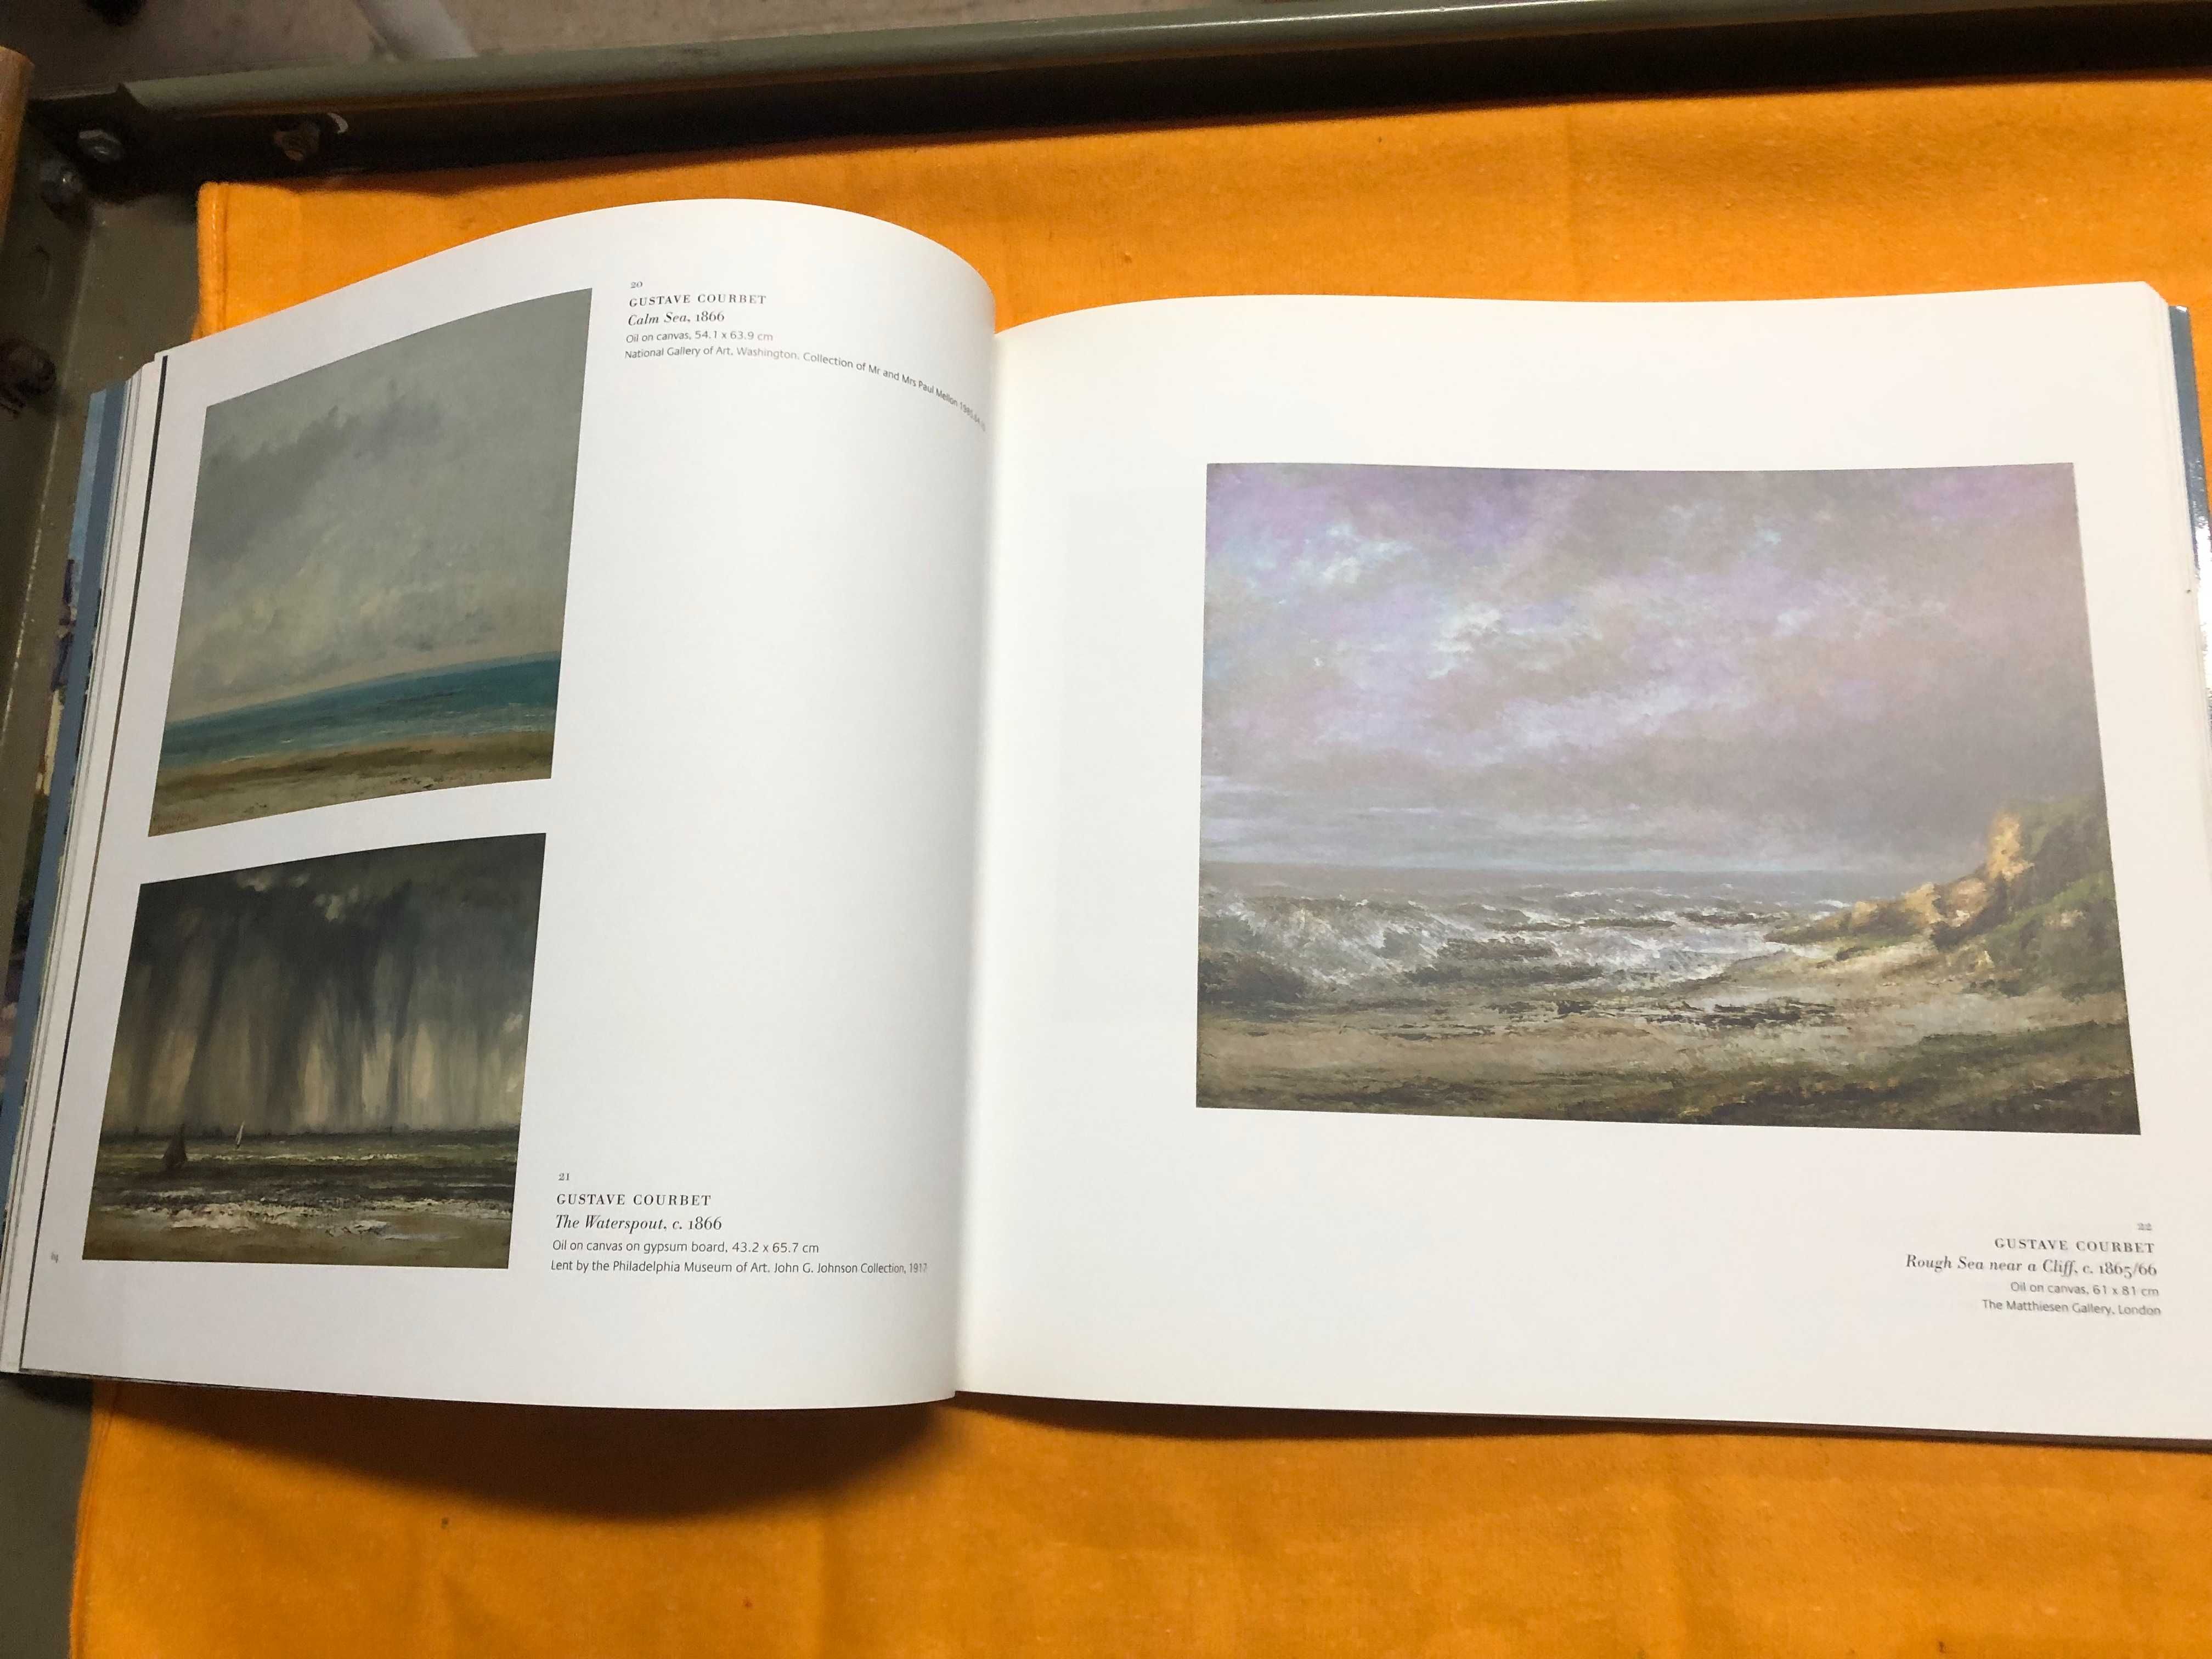 Impressionists by the sea - John House with an essay by David Hopkin